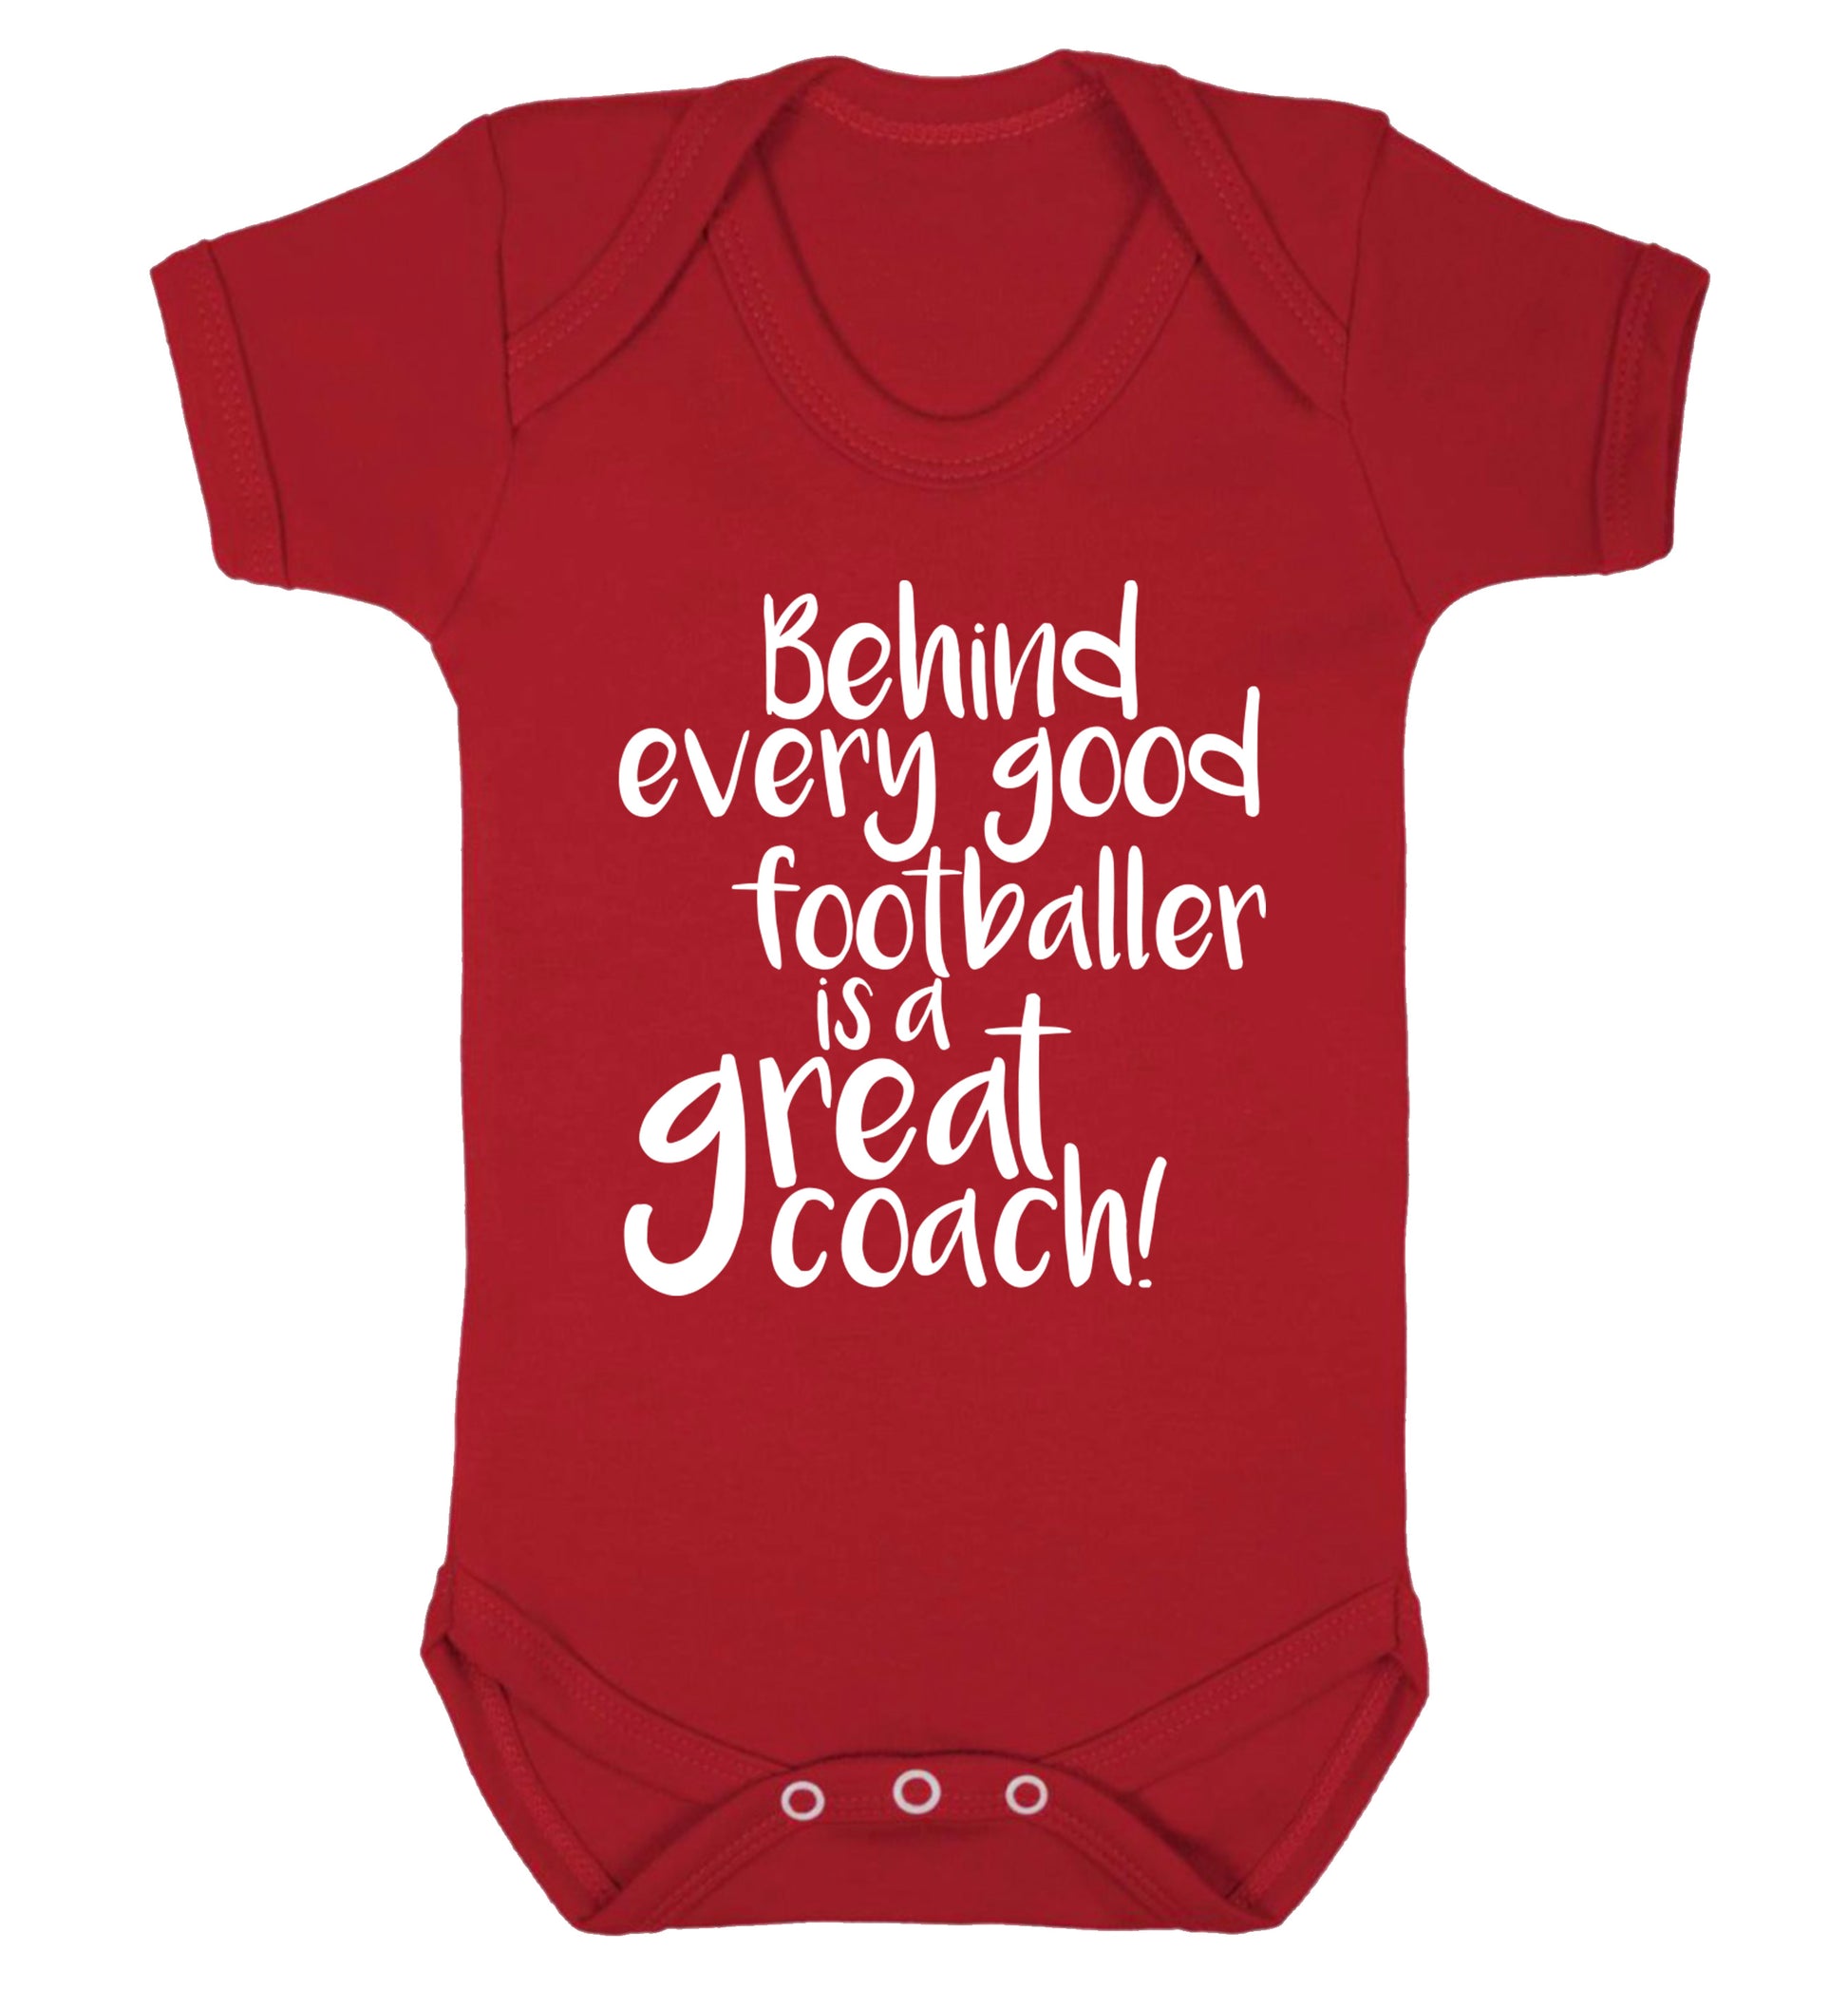 Behind every good footballer is a great coach! Baby Vest red 18-24 months